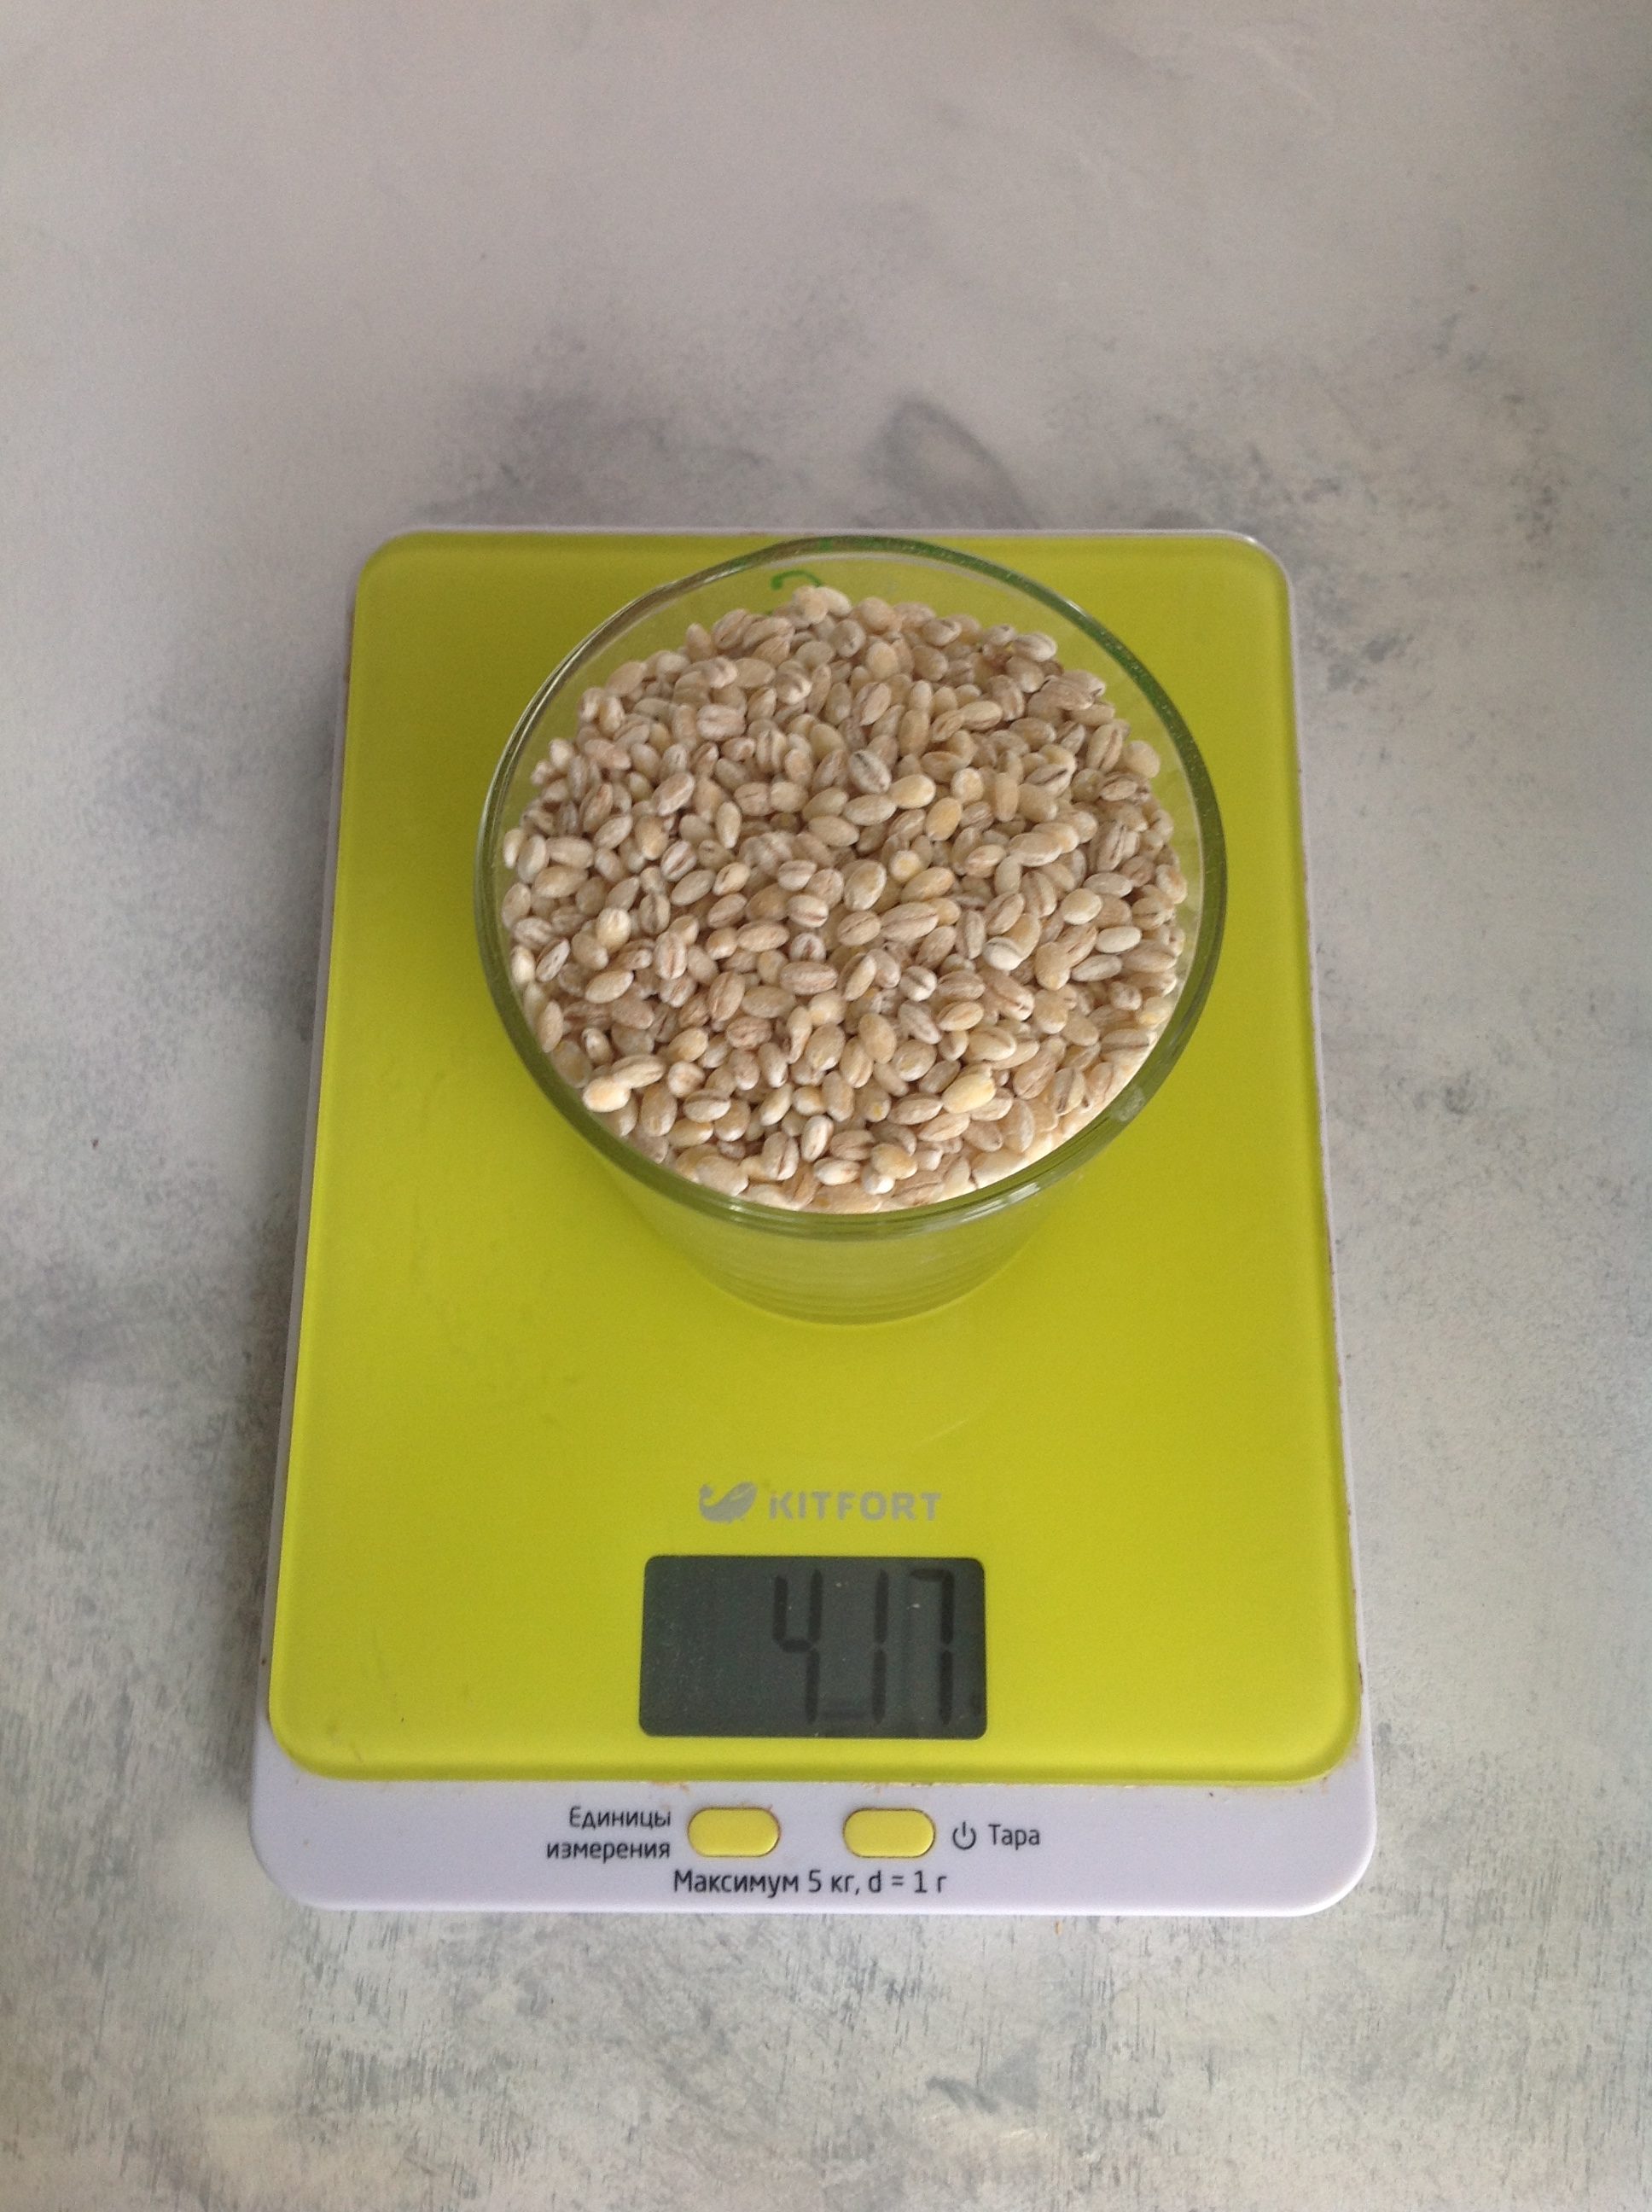 How much does fine dry barley weigh in a glass of 250 ml?